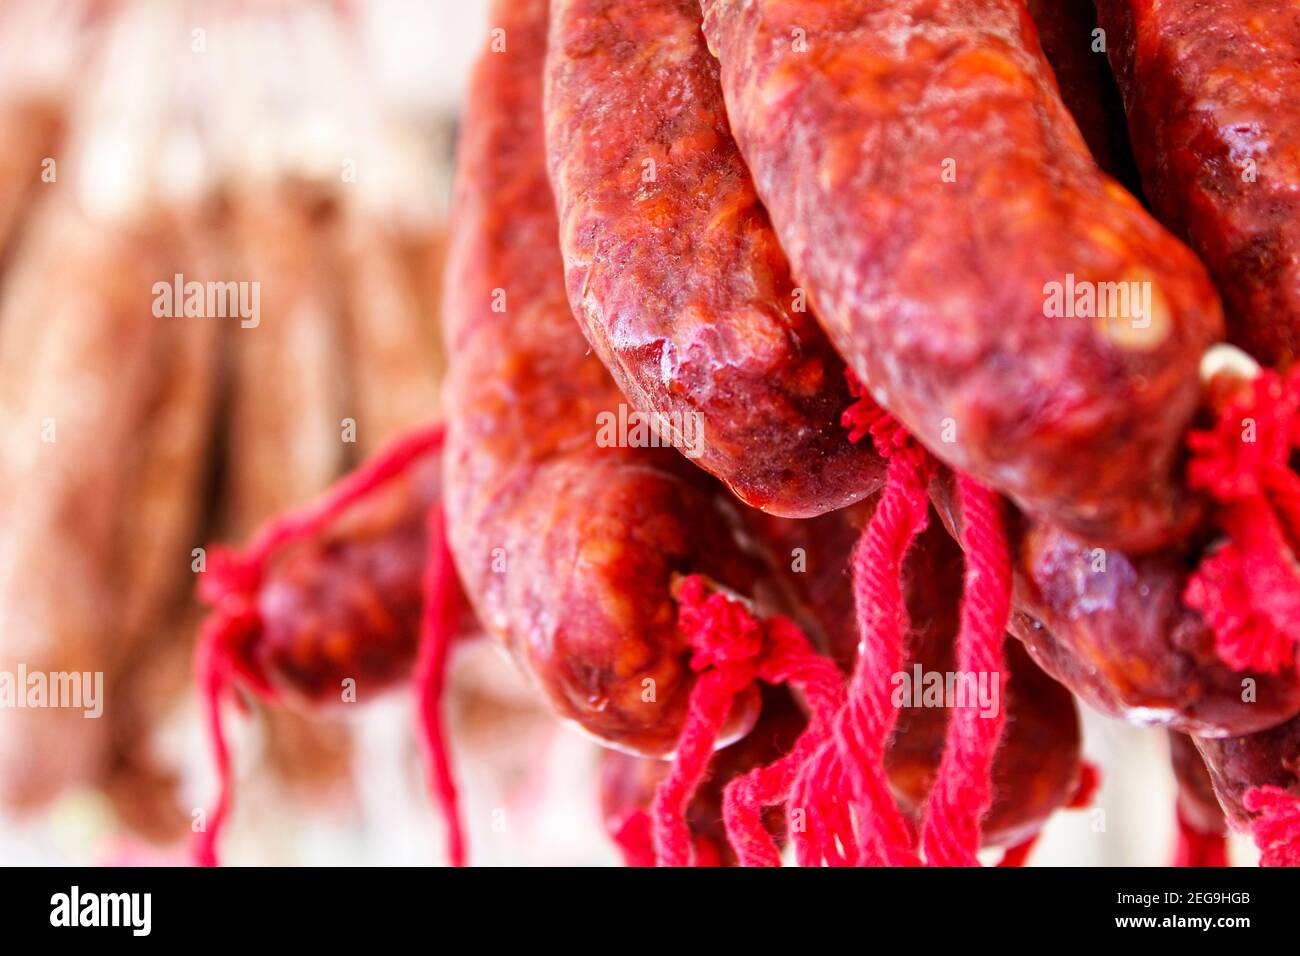 Spicy pork sausage for sale at a market stall in Spain Stock Photo